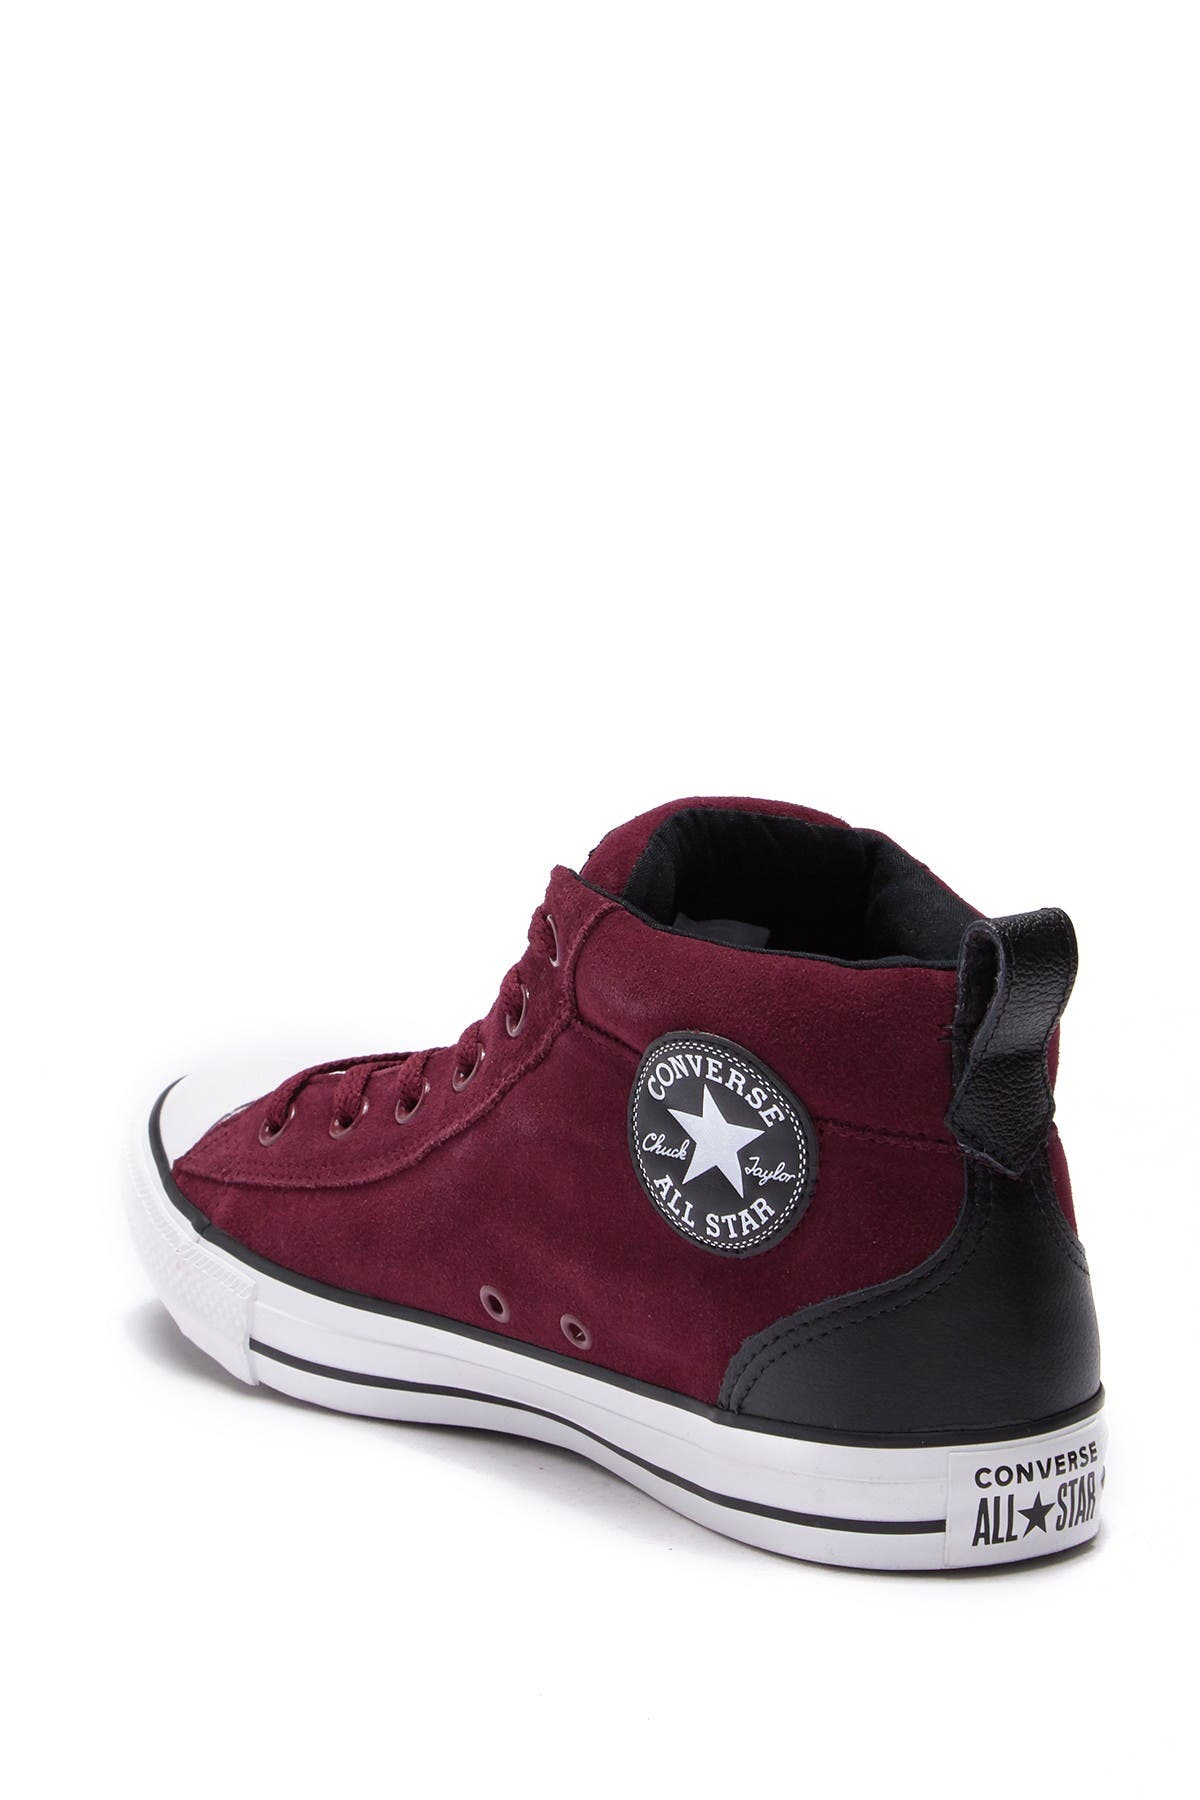 converse chuck taylor all star street suede mid sneaker